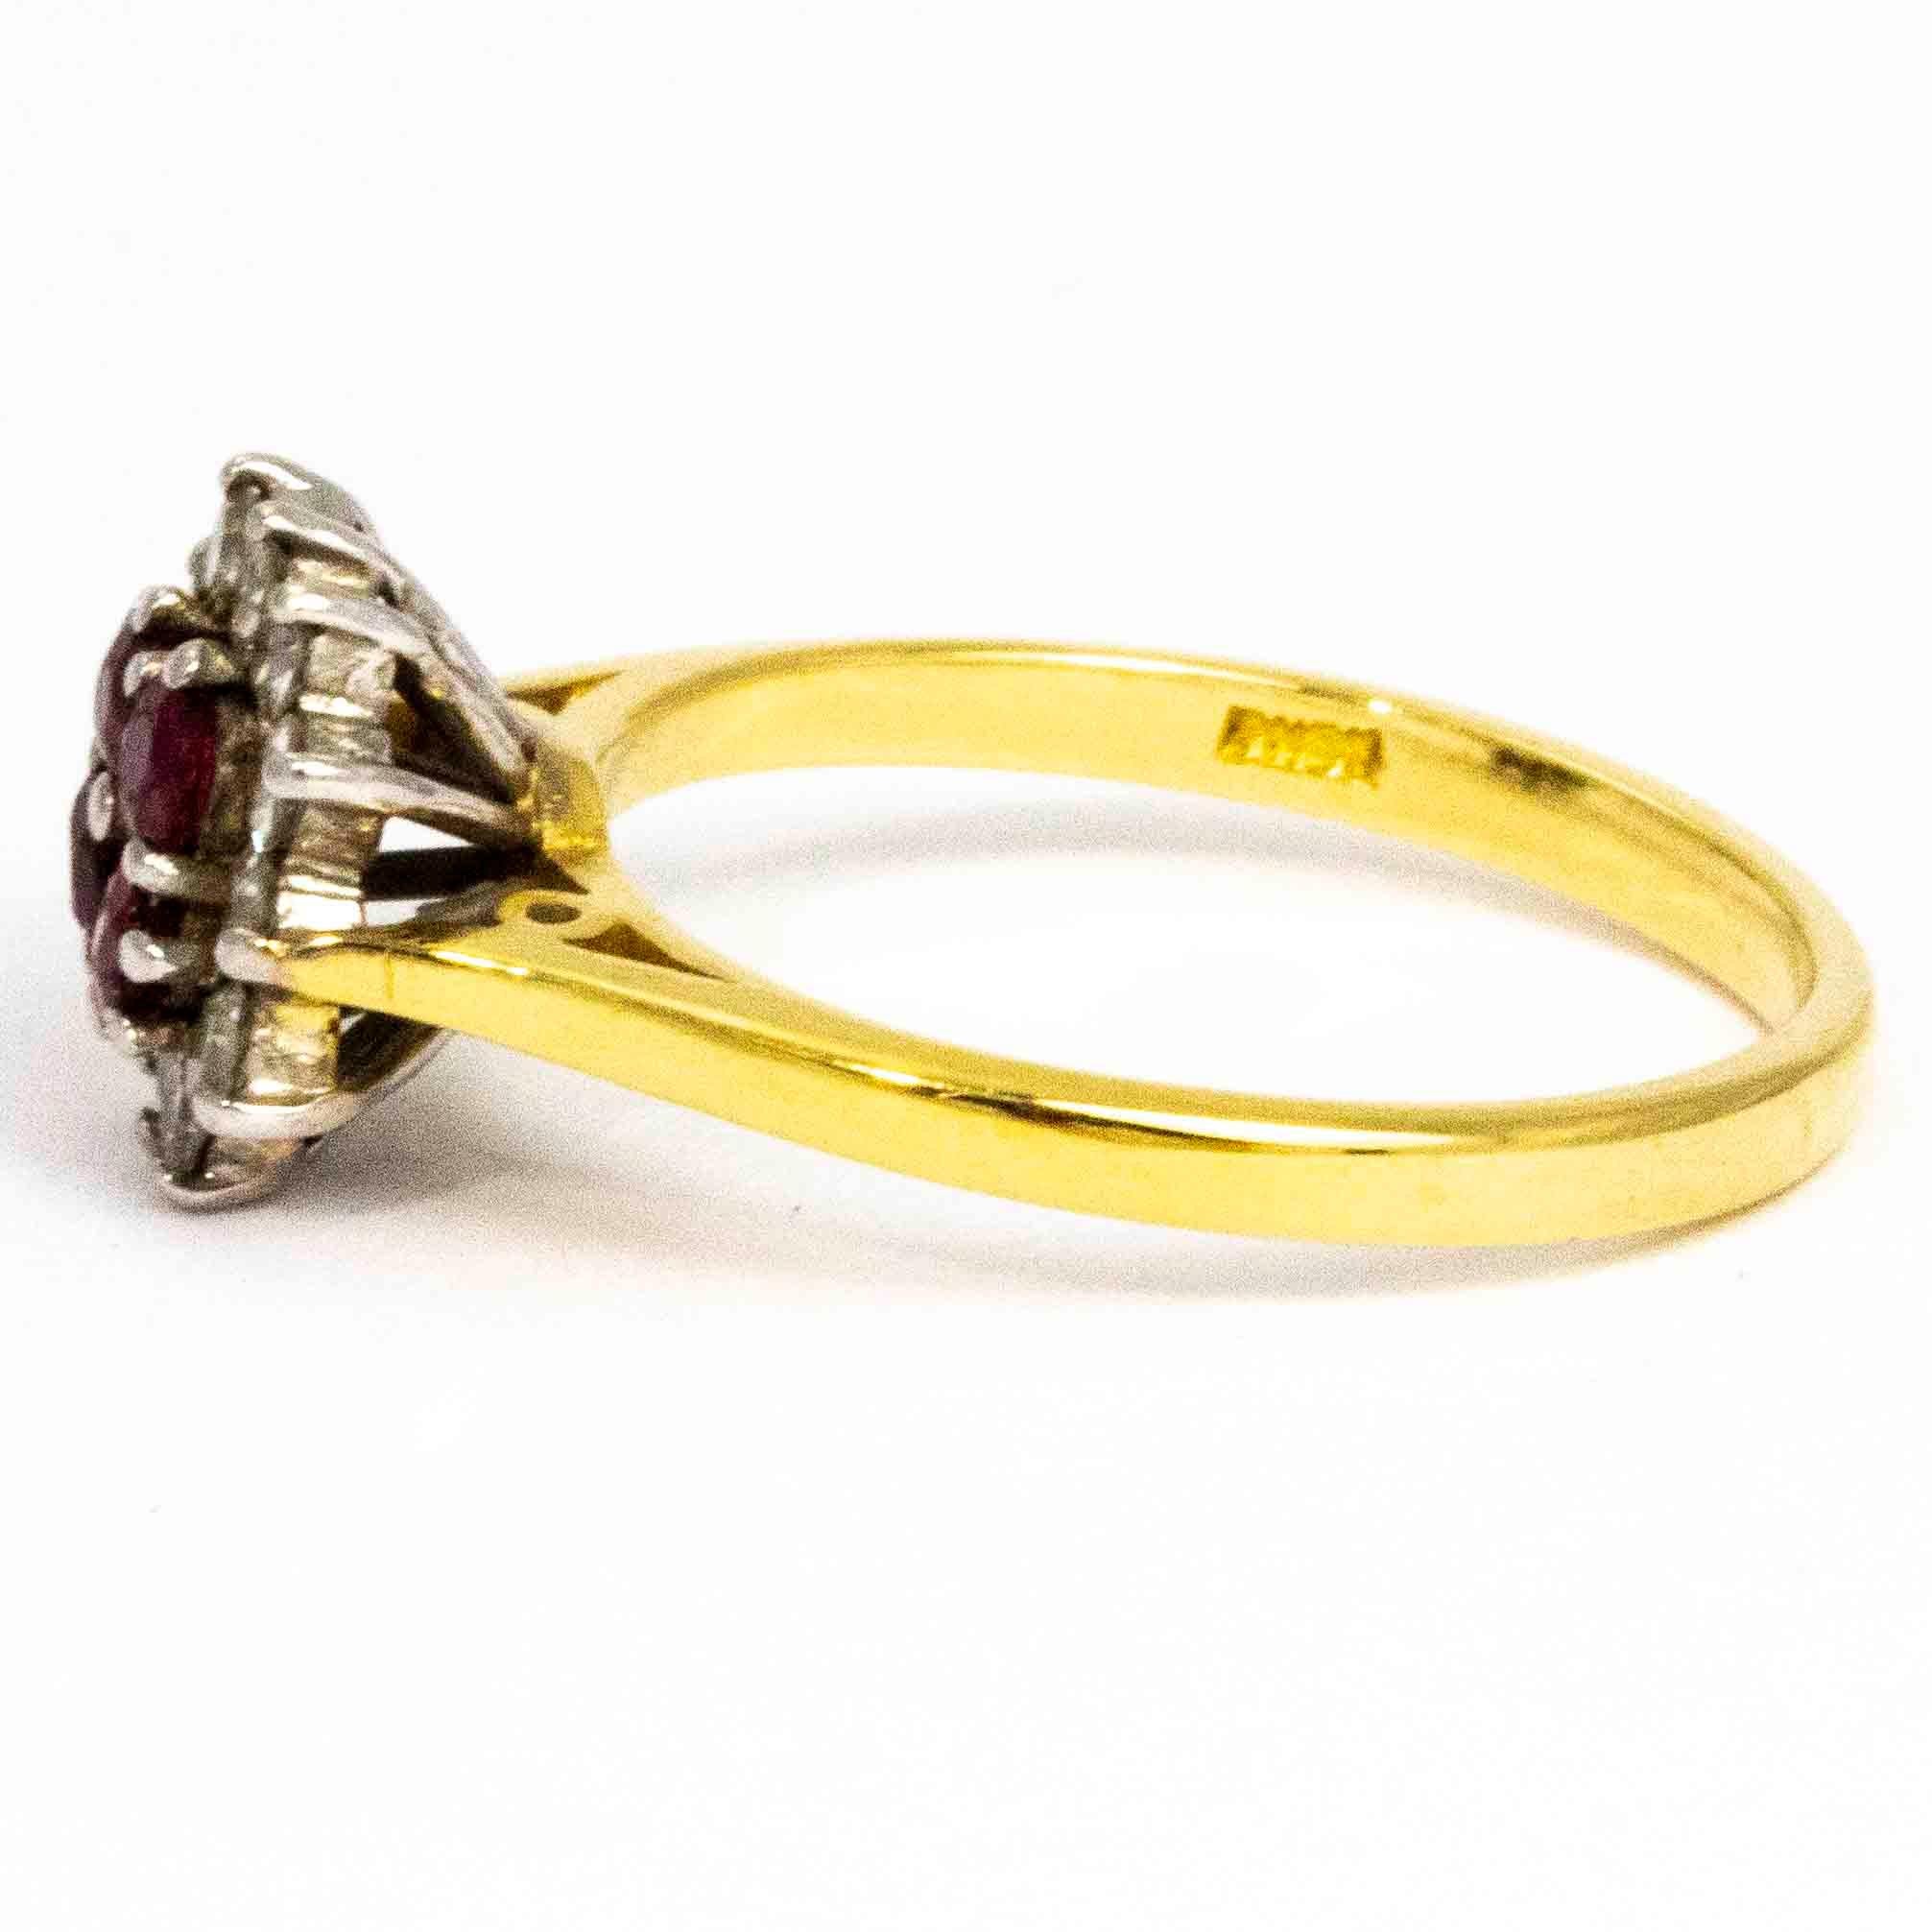 This ruby and diamond cluster ring has a stunning sparkle to it. The centre of the cluster features four 7pt rubies and around the gorgeous deep red stones sit twelve bright glistening 3pt diamonds. This ring with so much detail has a very simple